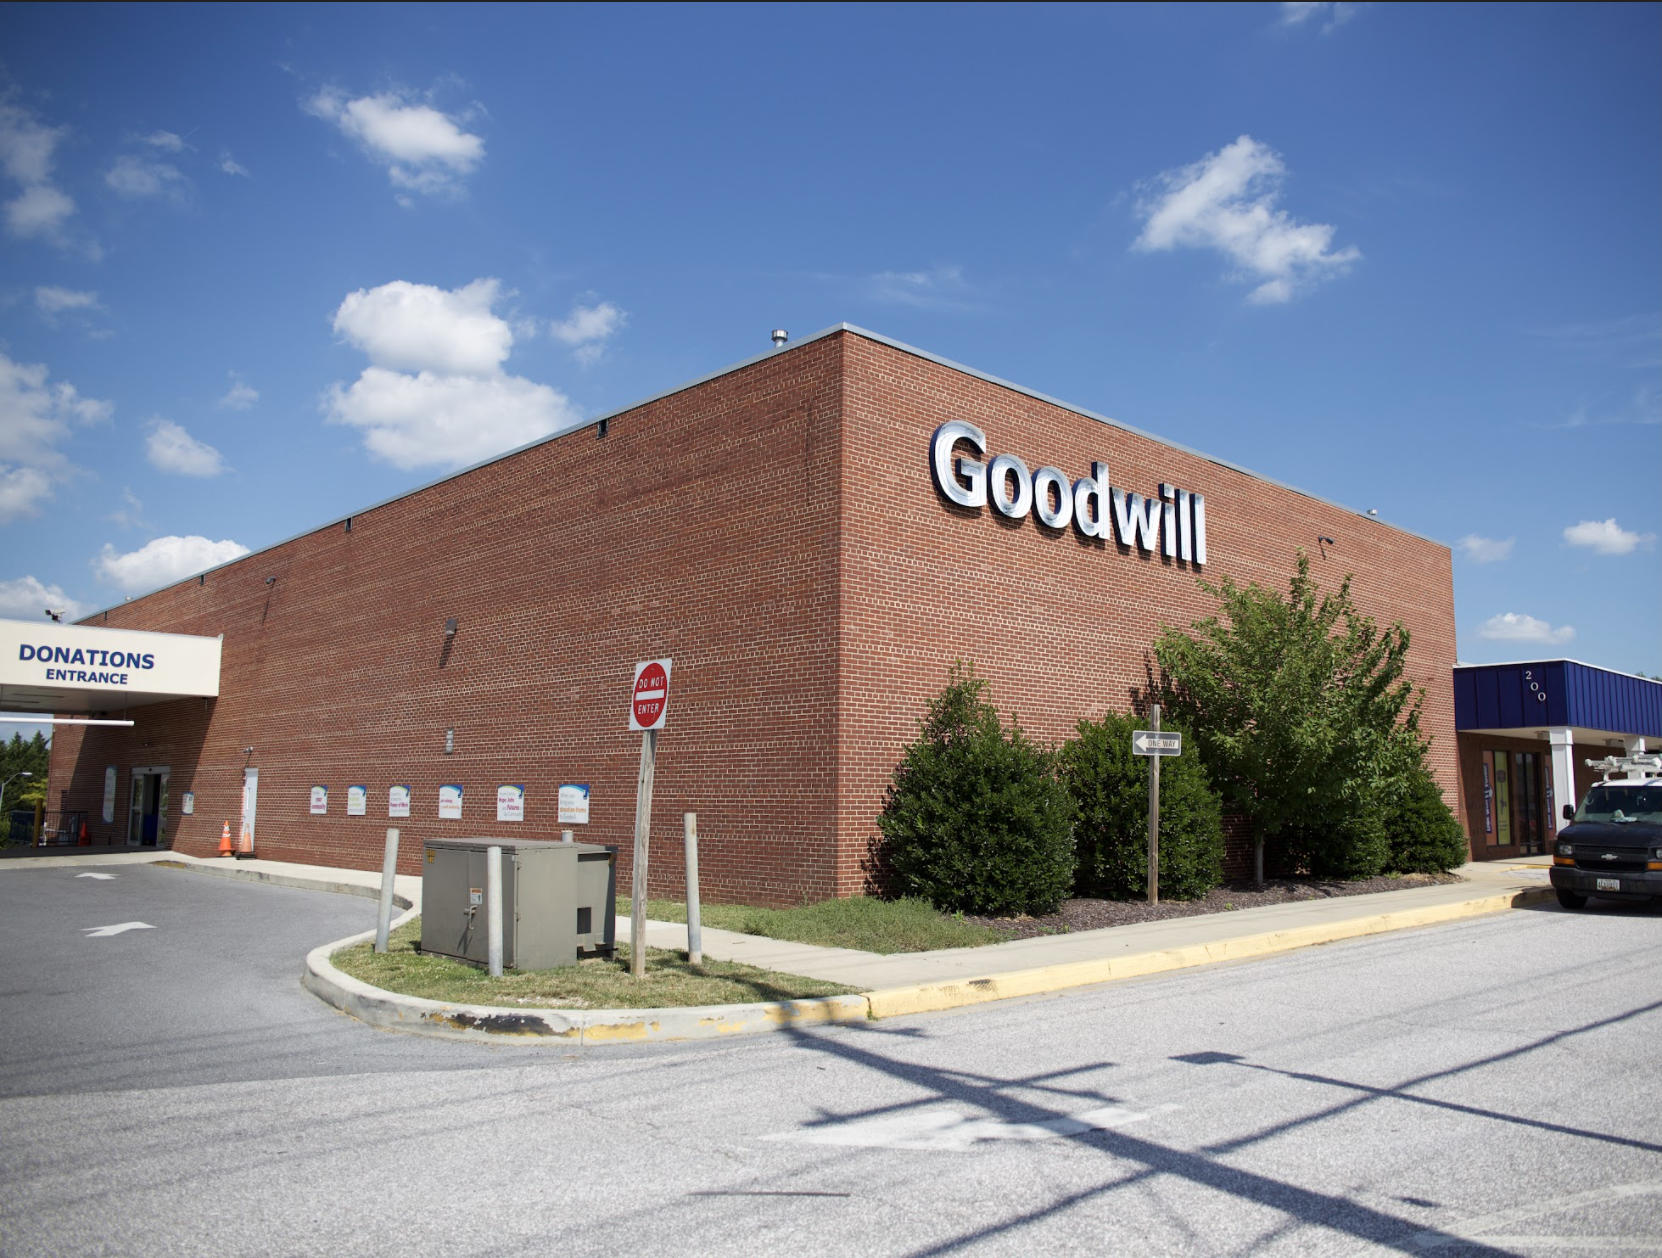 Westminster - Goodwill Retail Store, Donation Center and Self-Service Career Center